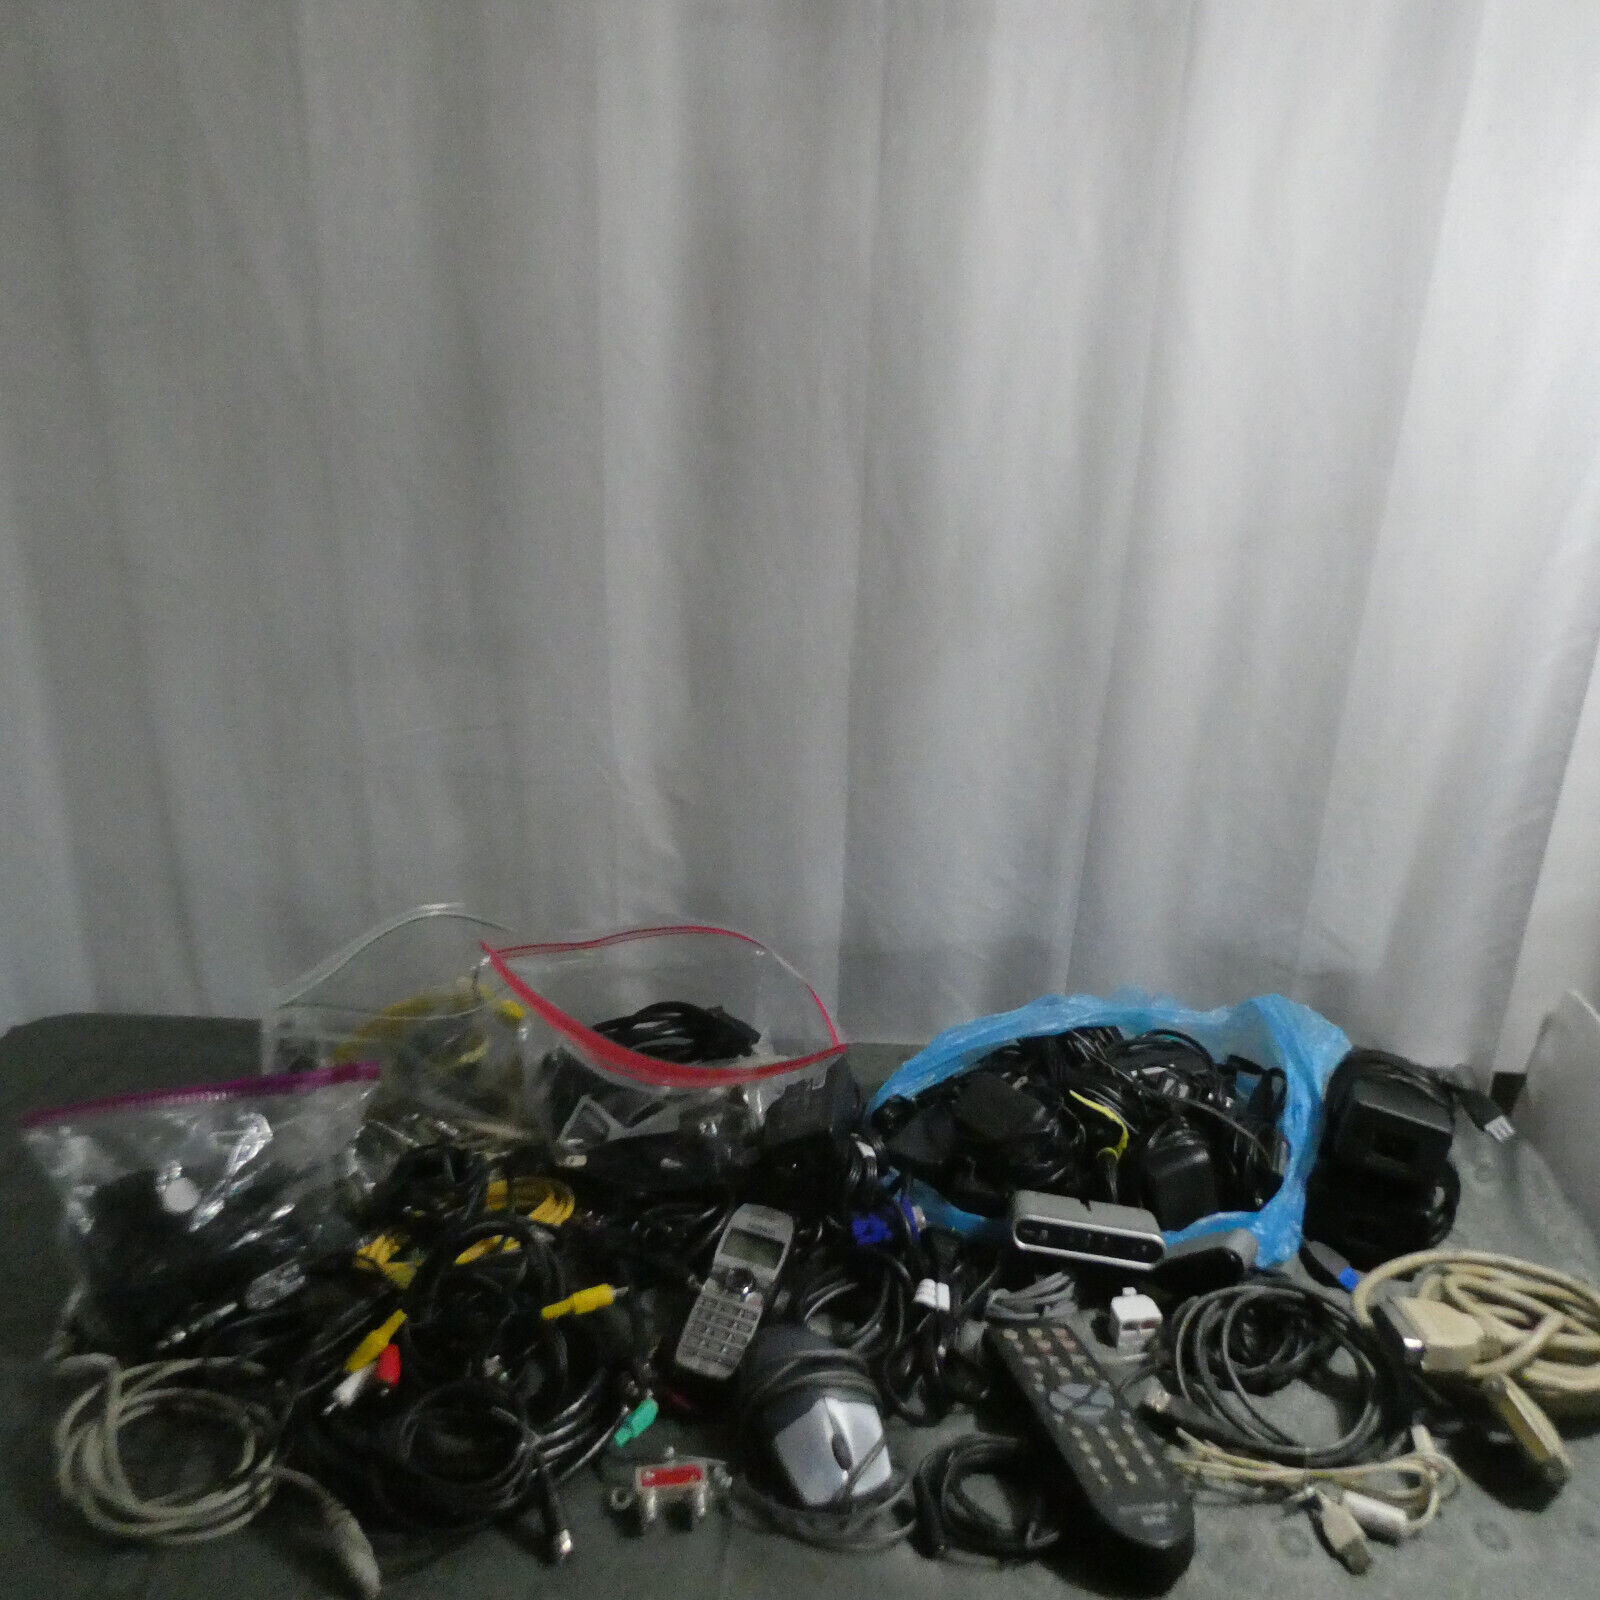 HUGE LOT OF 58 MISC CABLES, ADAPTERS, POWER CORDS, NETWORK, CHARGERS, ETC PCS